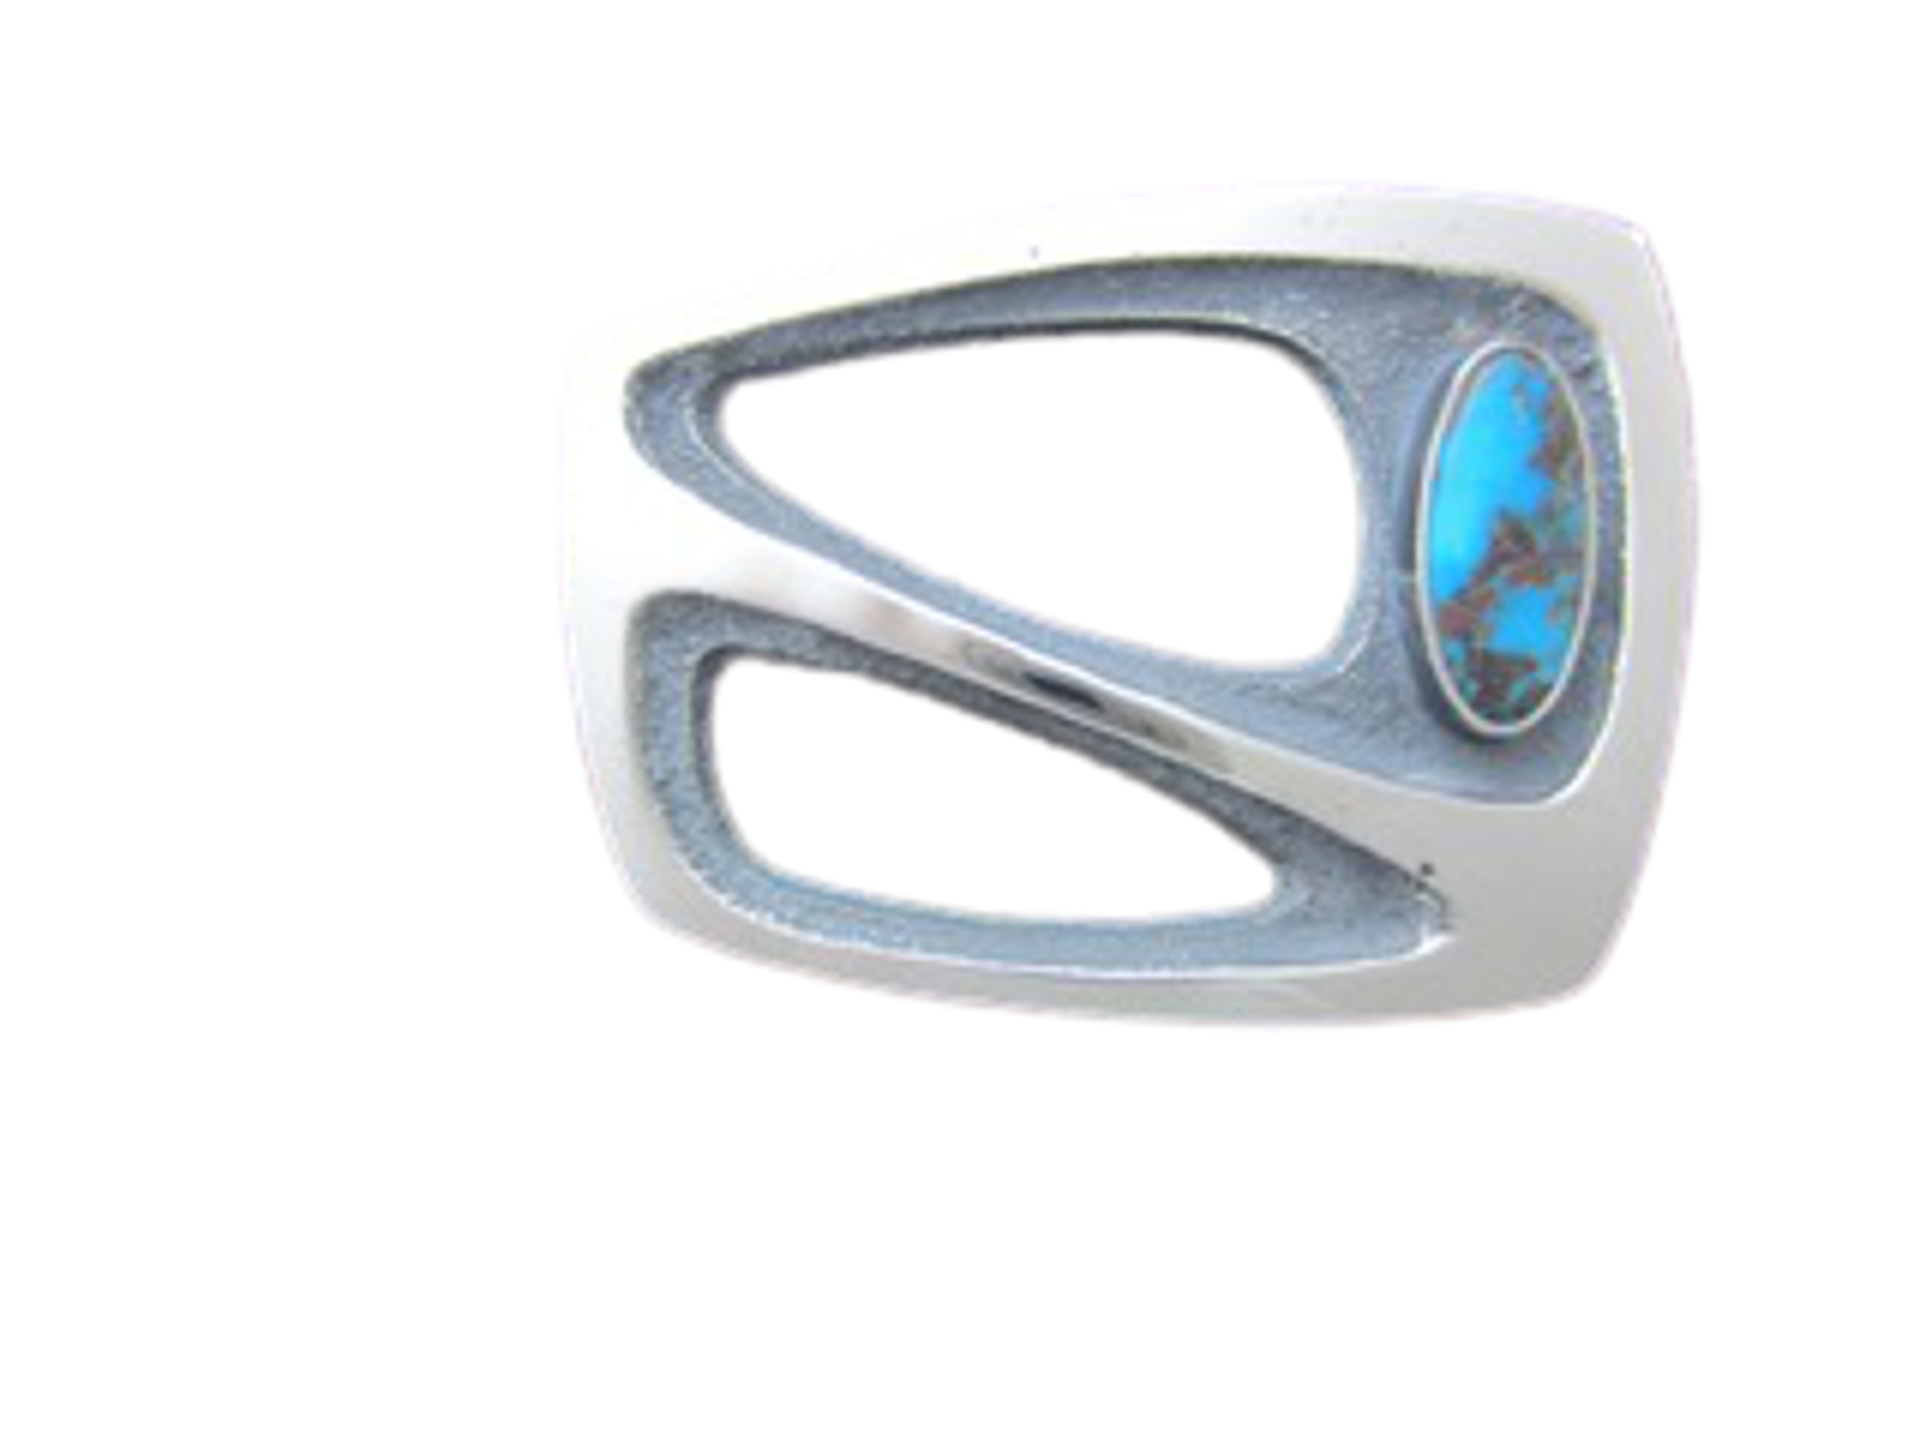 Belt Buckle - Sandcast Sterling Silver With Bisbee Turquoise #8/12  - 468 by Ken and Barbara Newman